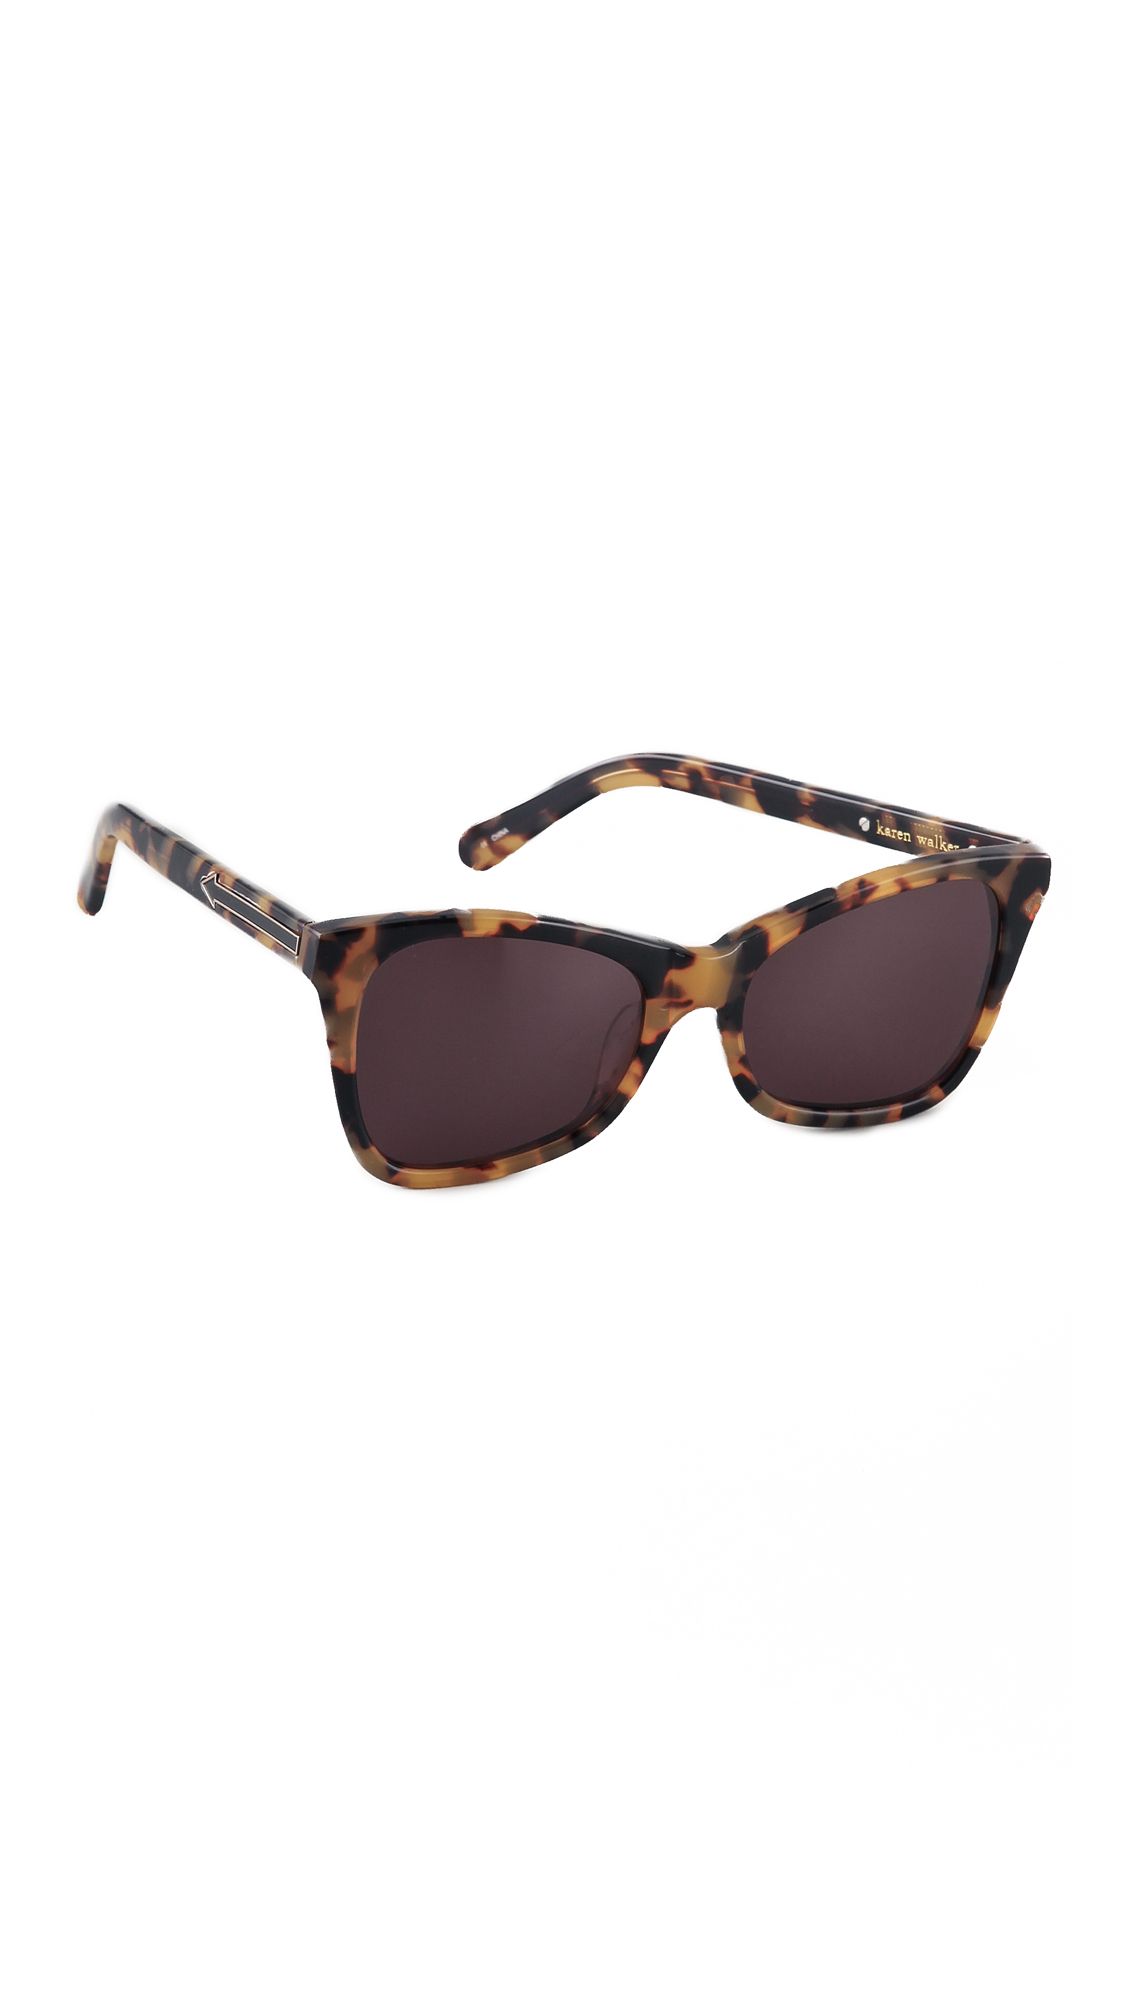 Perfect Day Sunglasses | Shopbop